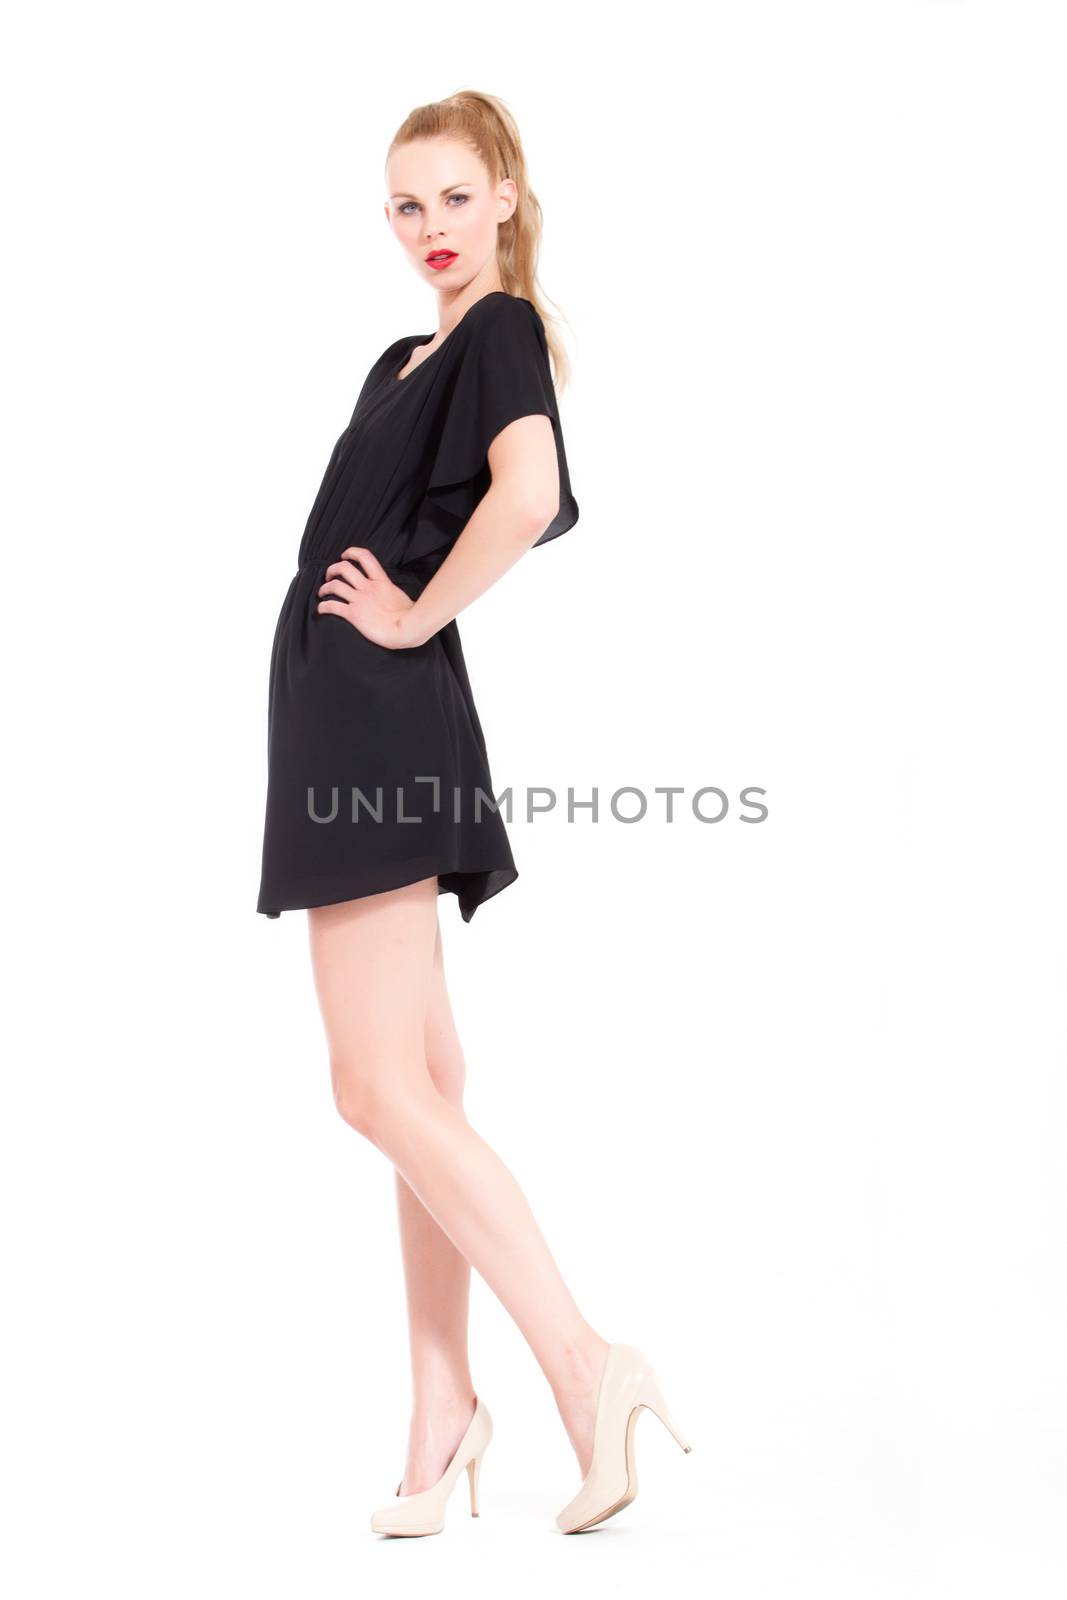 Beautifull young blond woman in the studio